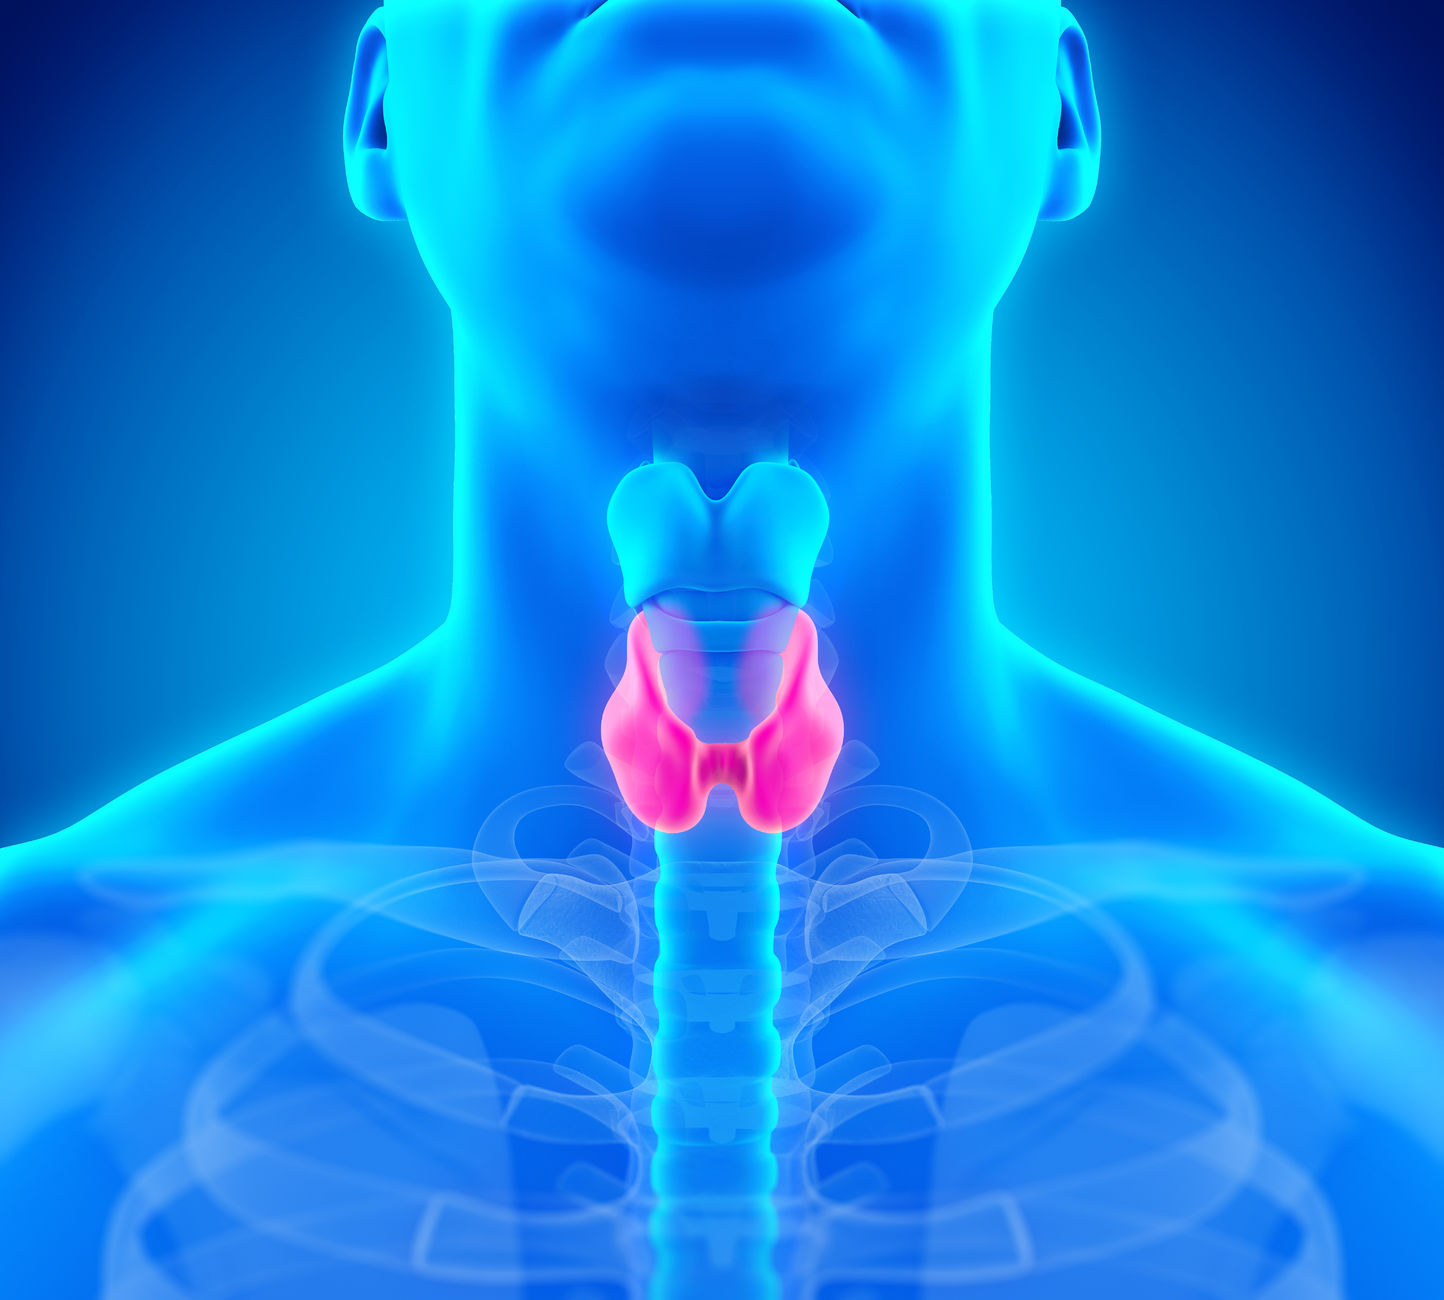 graves, graves disease, thyroid, the woodlands, theramineral, texas, houston, vitamins, supplements